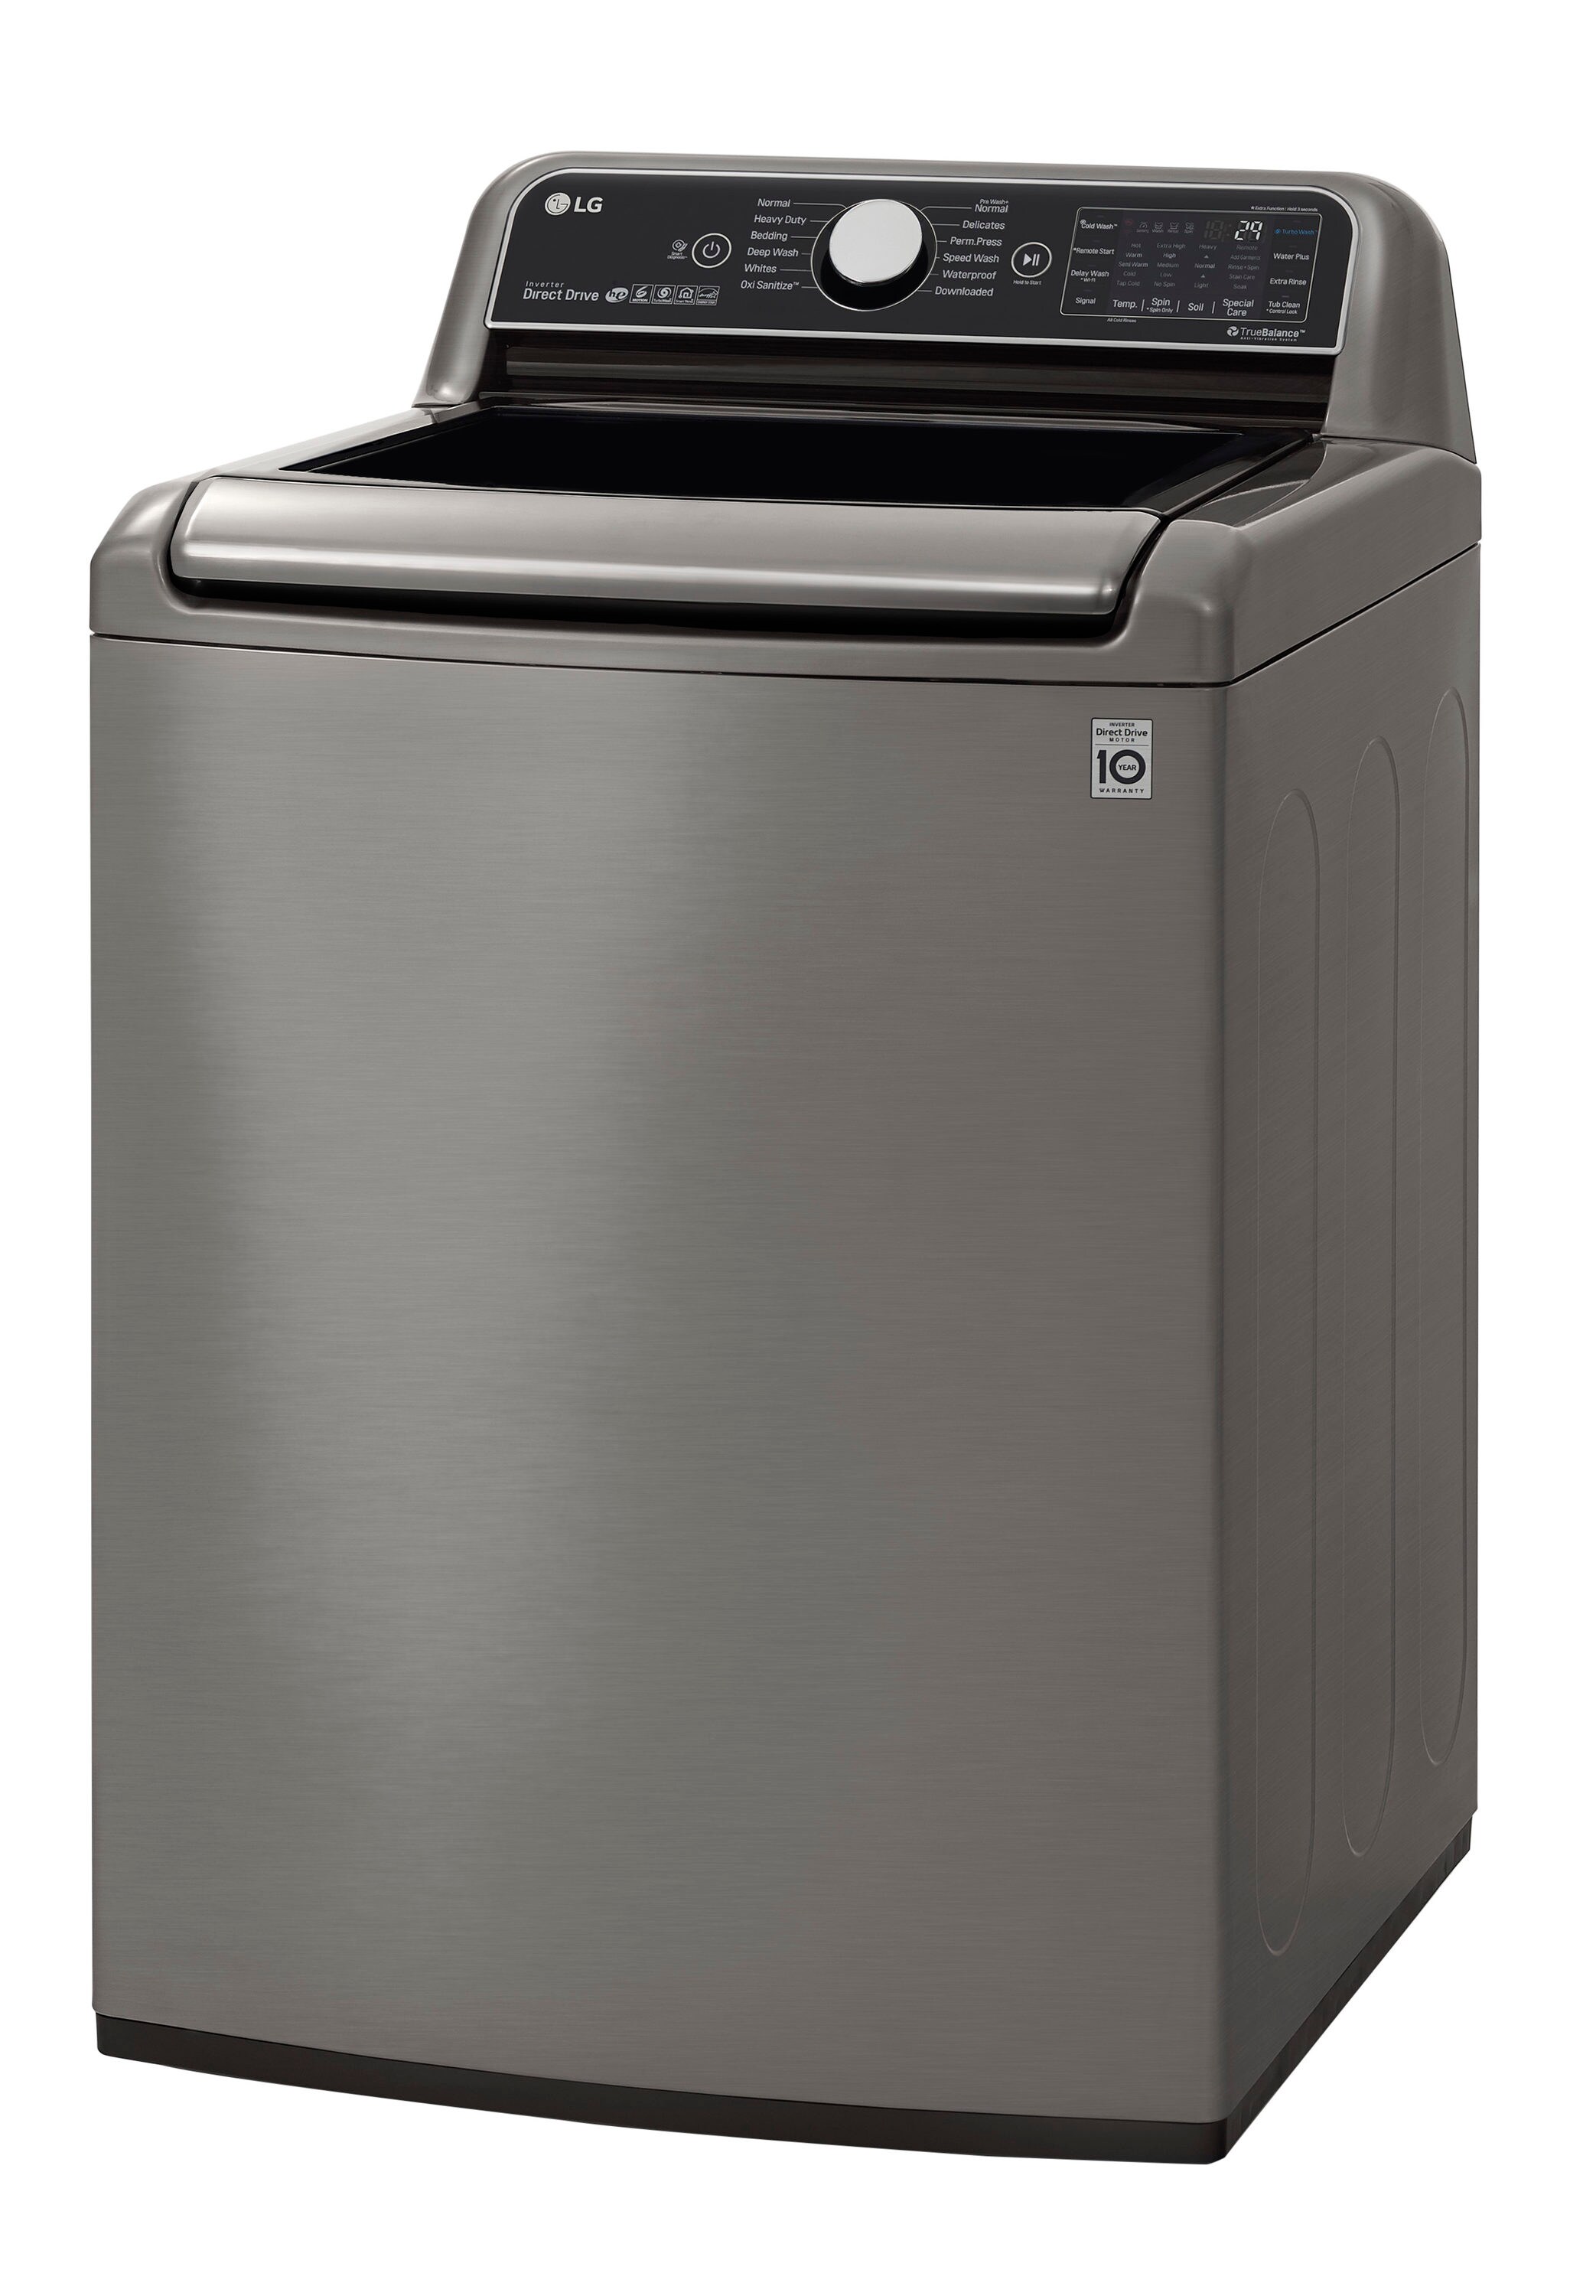 LG WT1801HVA 27 Inch 5.0 cu. ft. Top Load Washer with 12 Wash Programs,  1,100 RPM, Steam, TurboWash, Speed Wash, StainCare, SmartDiagnosis and  ENERGY STAR Certification: Graphite Steel